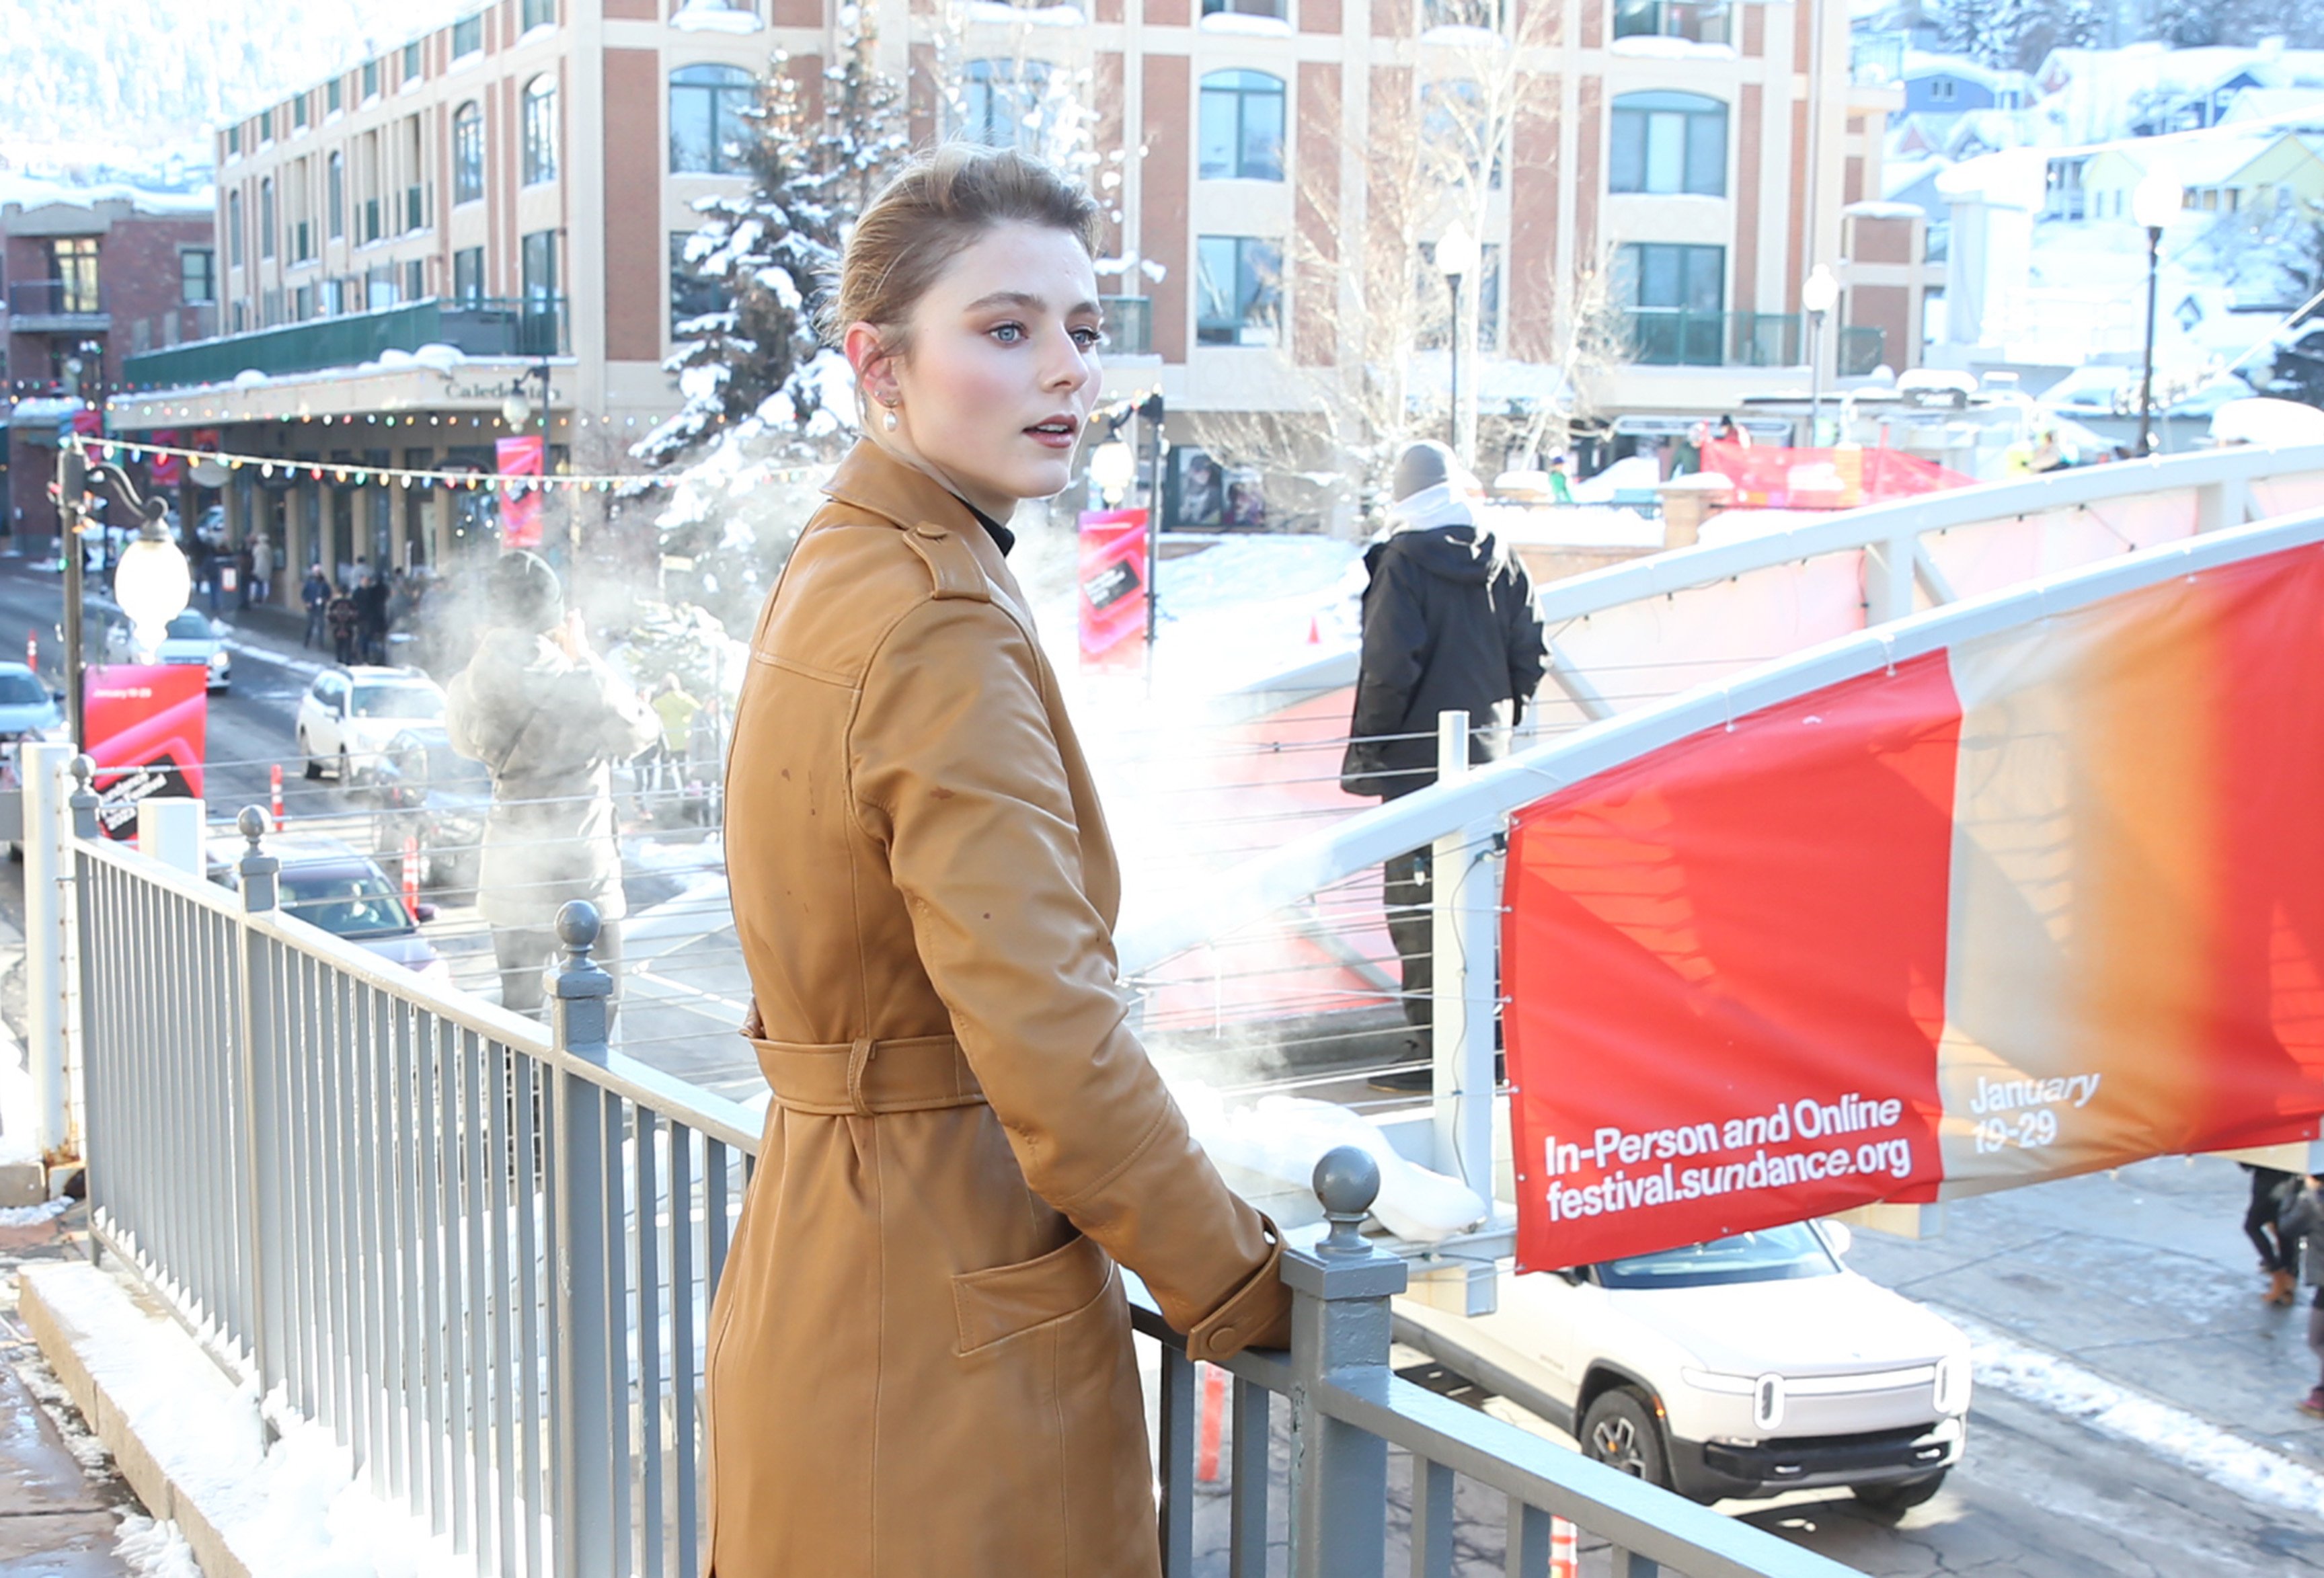 Thomasin McKenzie attends The 2023 Sundance Film Festival on January 21, 2023, in Park City, Utah. | Source: Getty Images